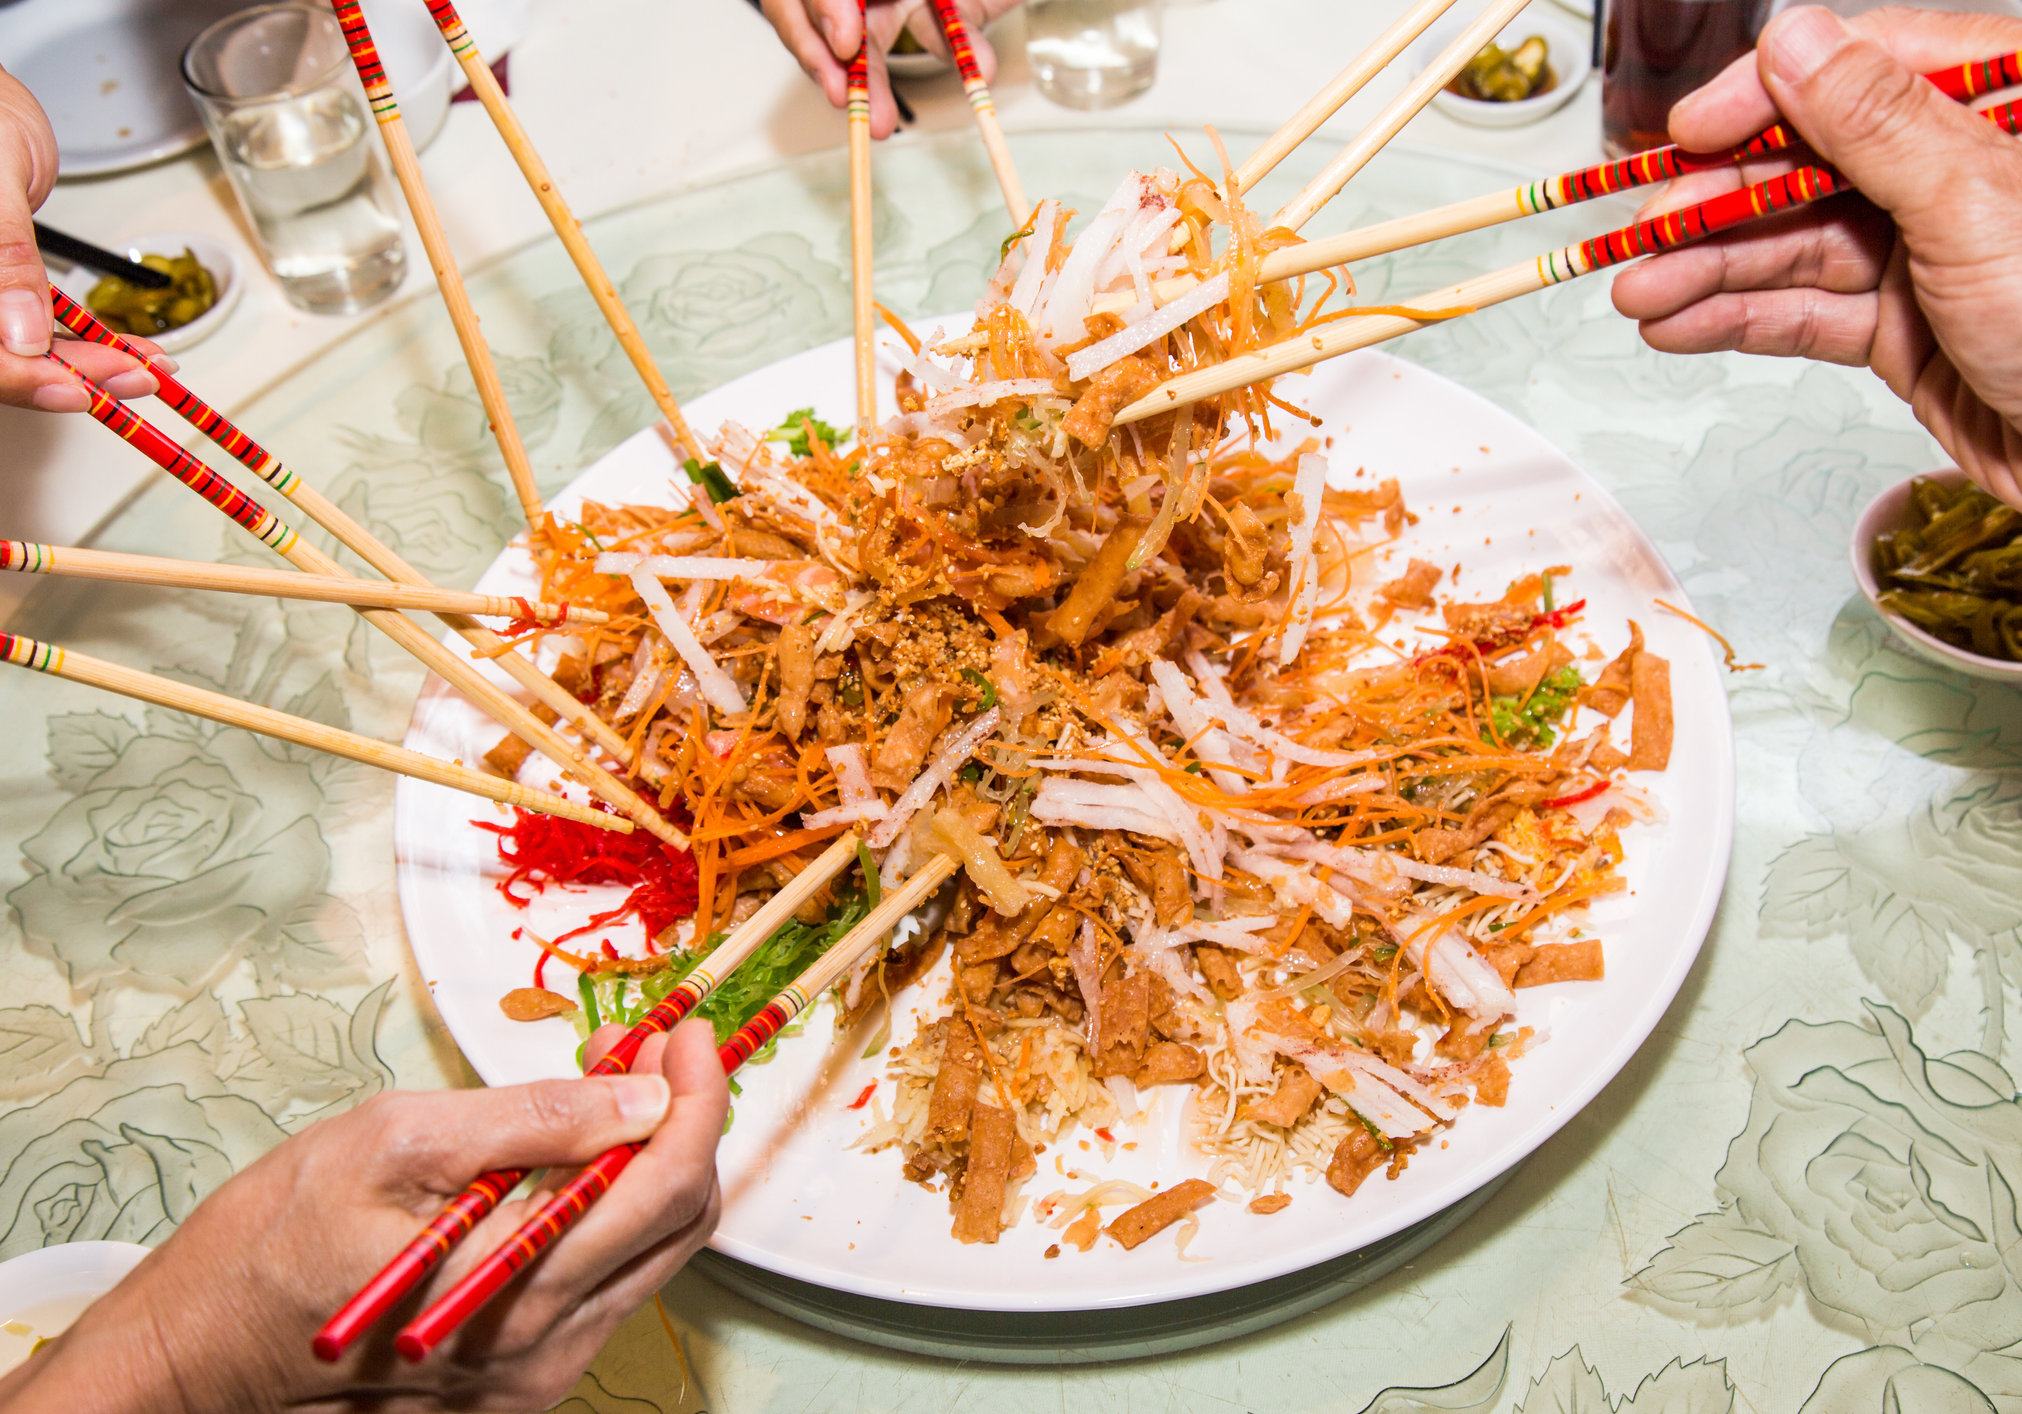 A group of people mixing and tossing Yee Sang dish with chop sticks. Yee Sang is a popular delicacy taken during Chinese New Year, believed to bring good fortune and luck